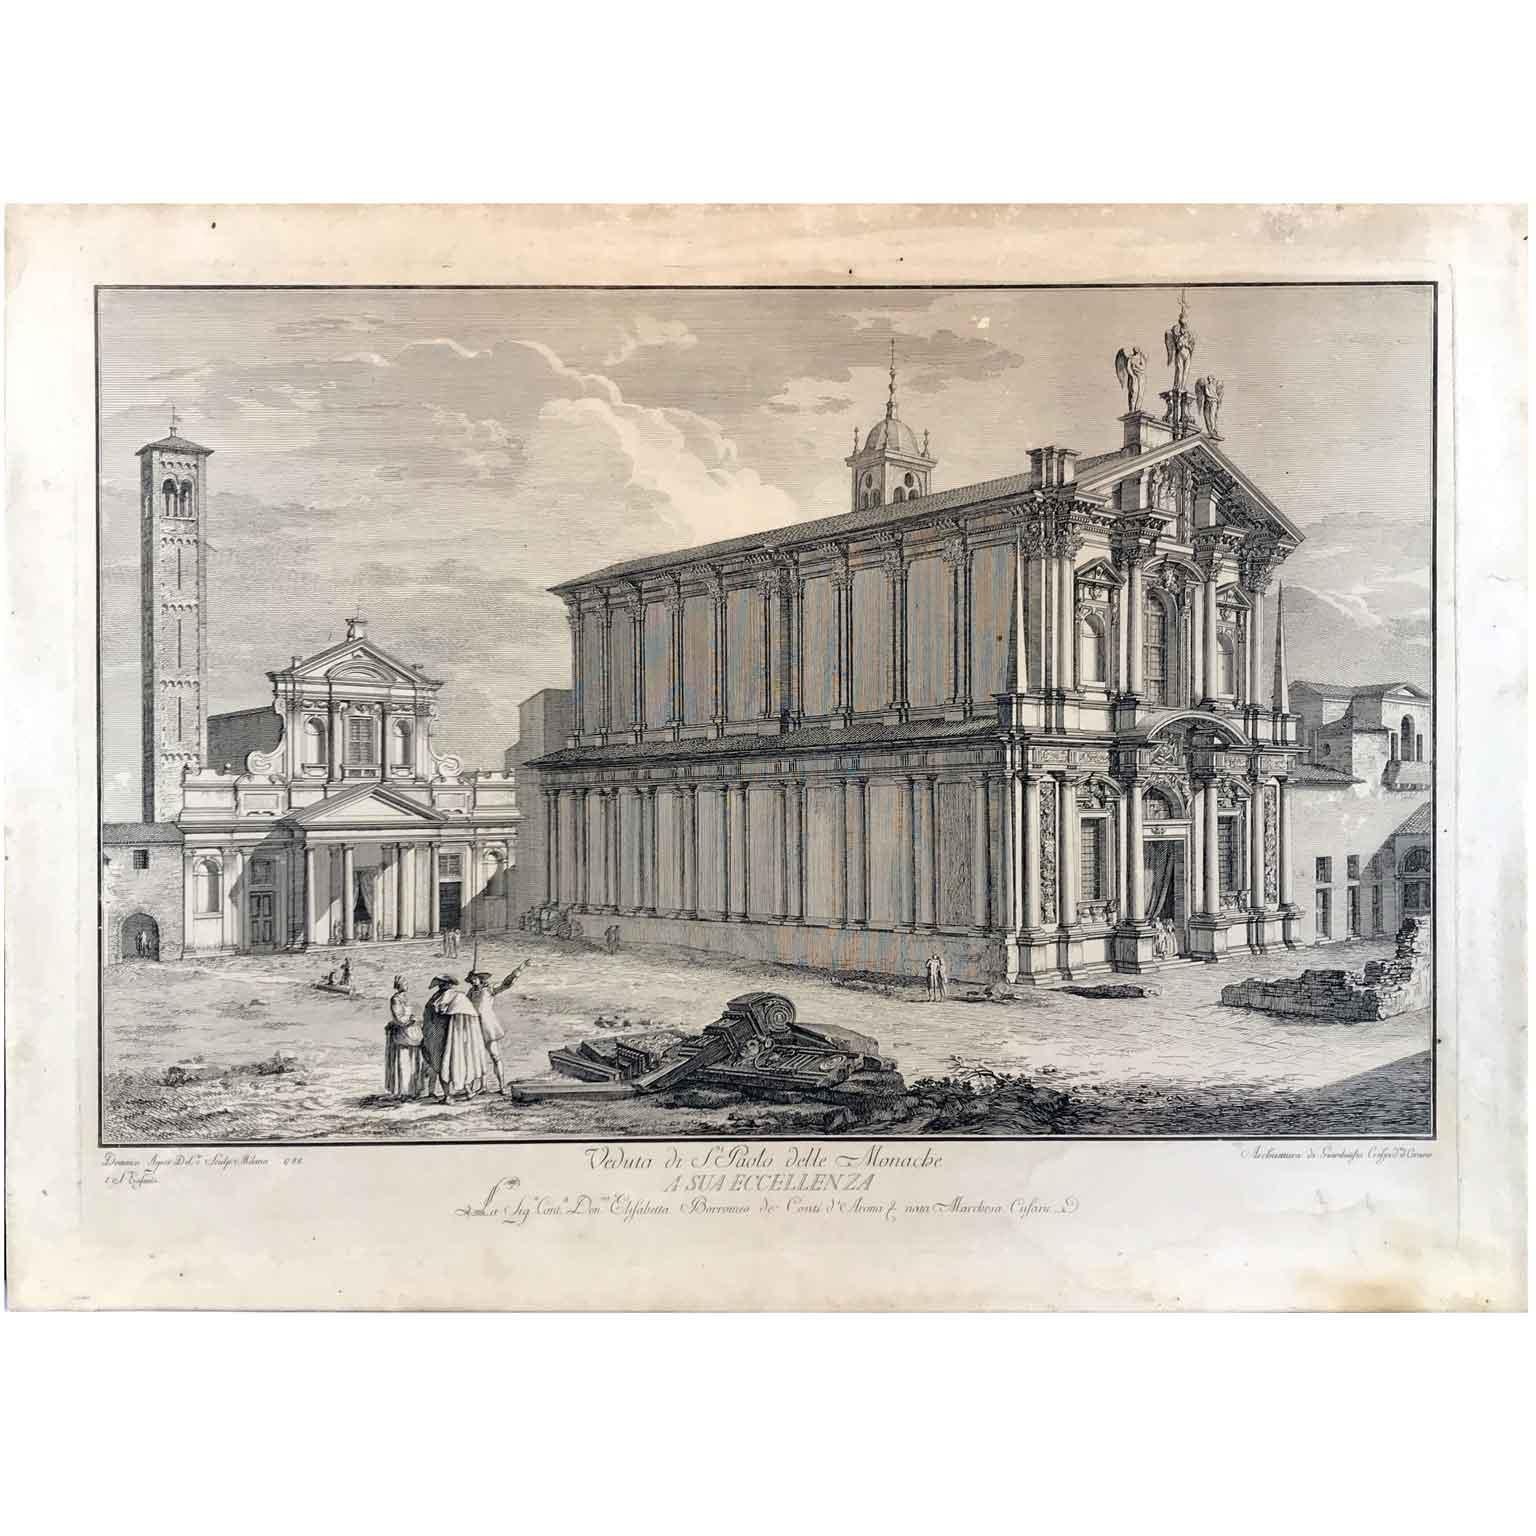 A rare view of Milan, an 18th century Italian etching and burin engraving with original ebonized walnut frame and glass depicting San Paolo delle Monache a Milan view, dated 1788, by Milanese engraver Aspari Domenico (Milan 1745-1831), an Italian